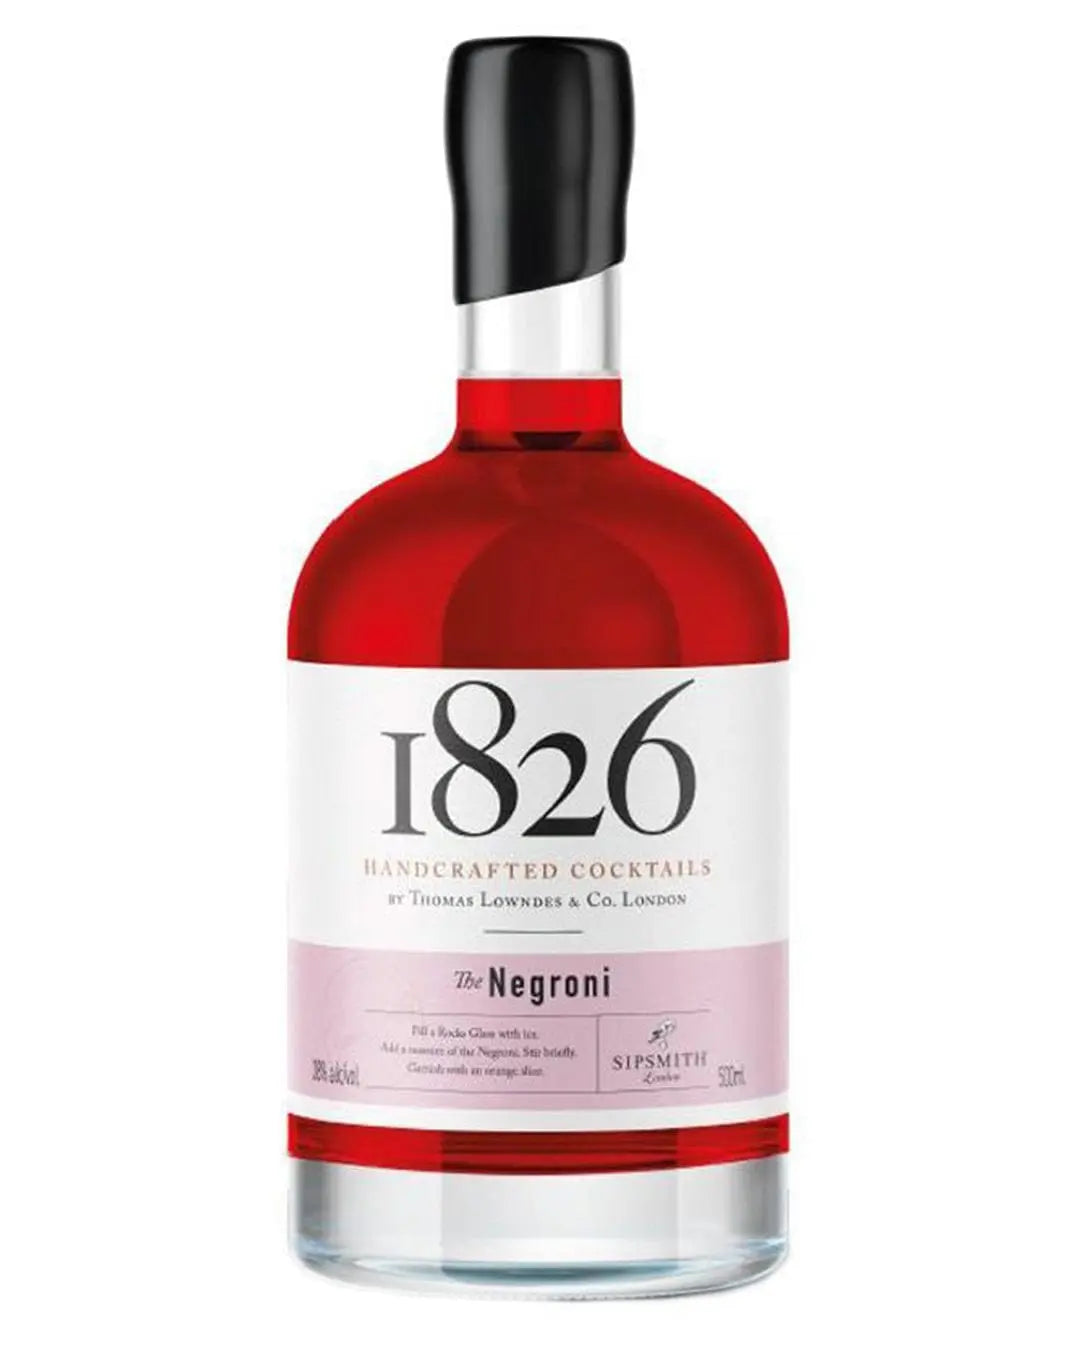 1826 Negroni Handcrafted Premixed Cocktail, 50 cl